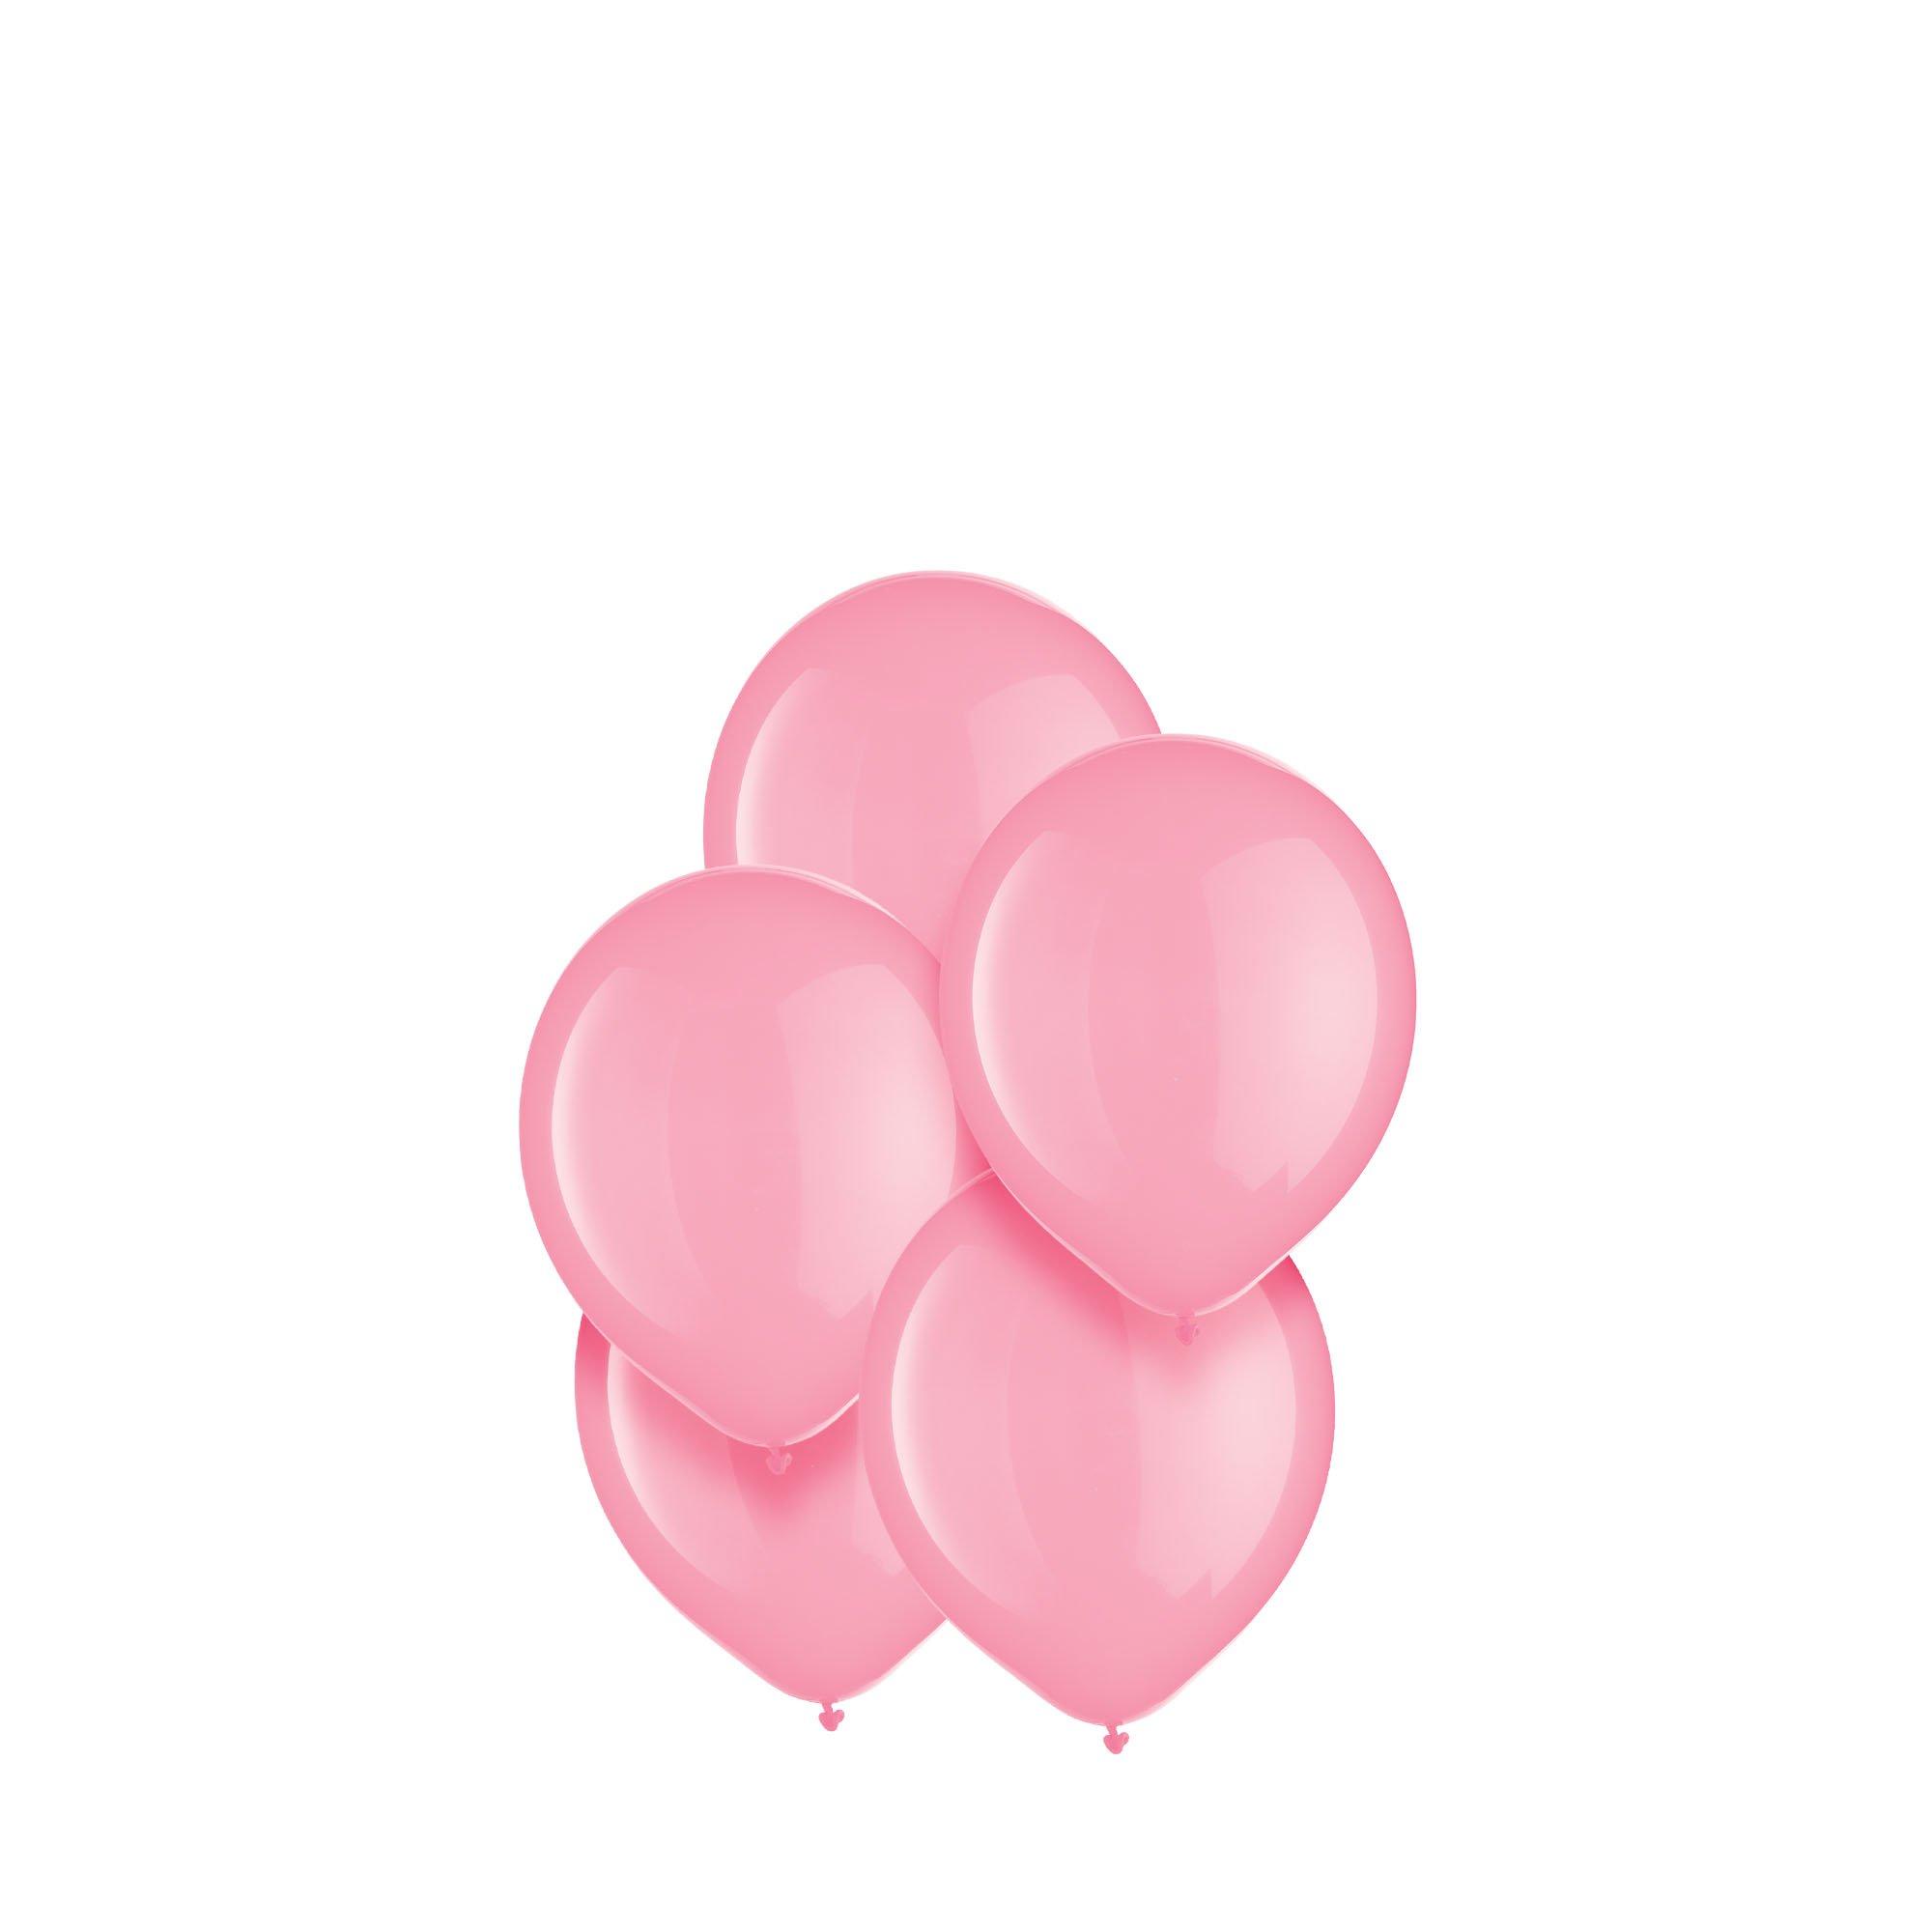 Saai is er factor 50ct, 5in, Pink Mini Balloons | Party City